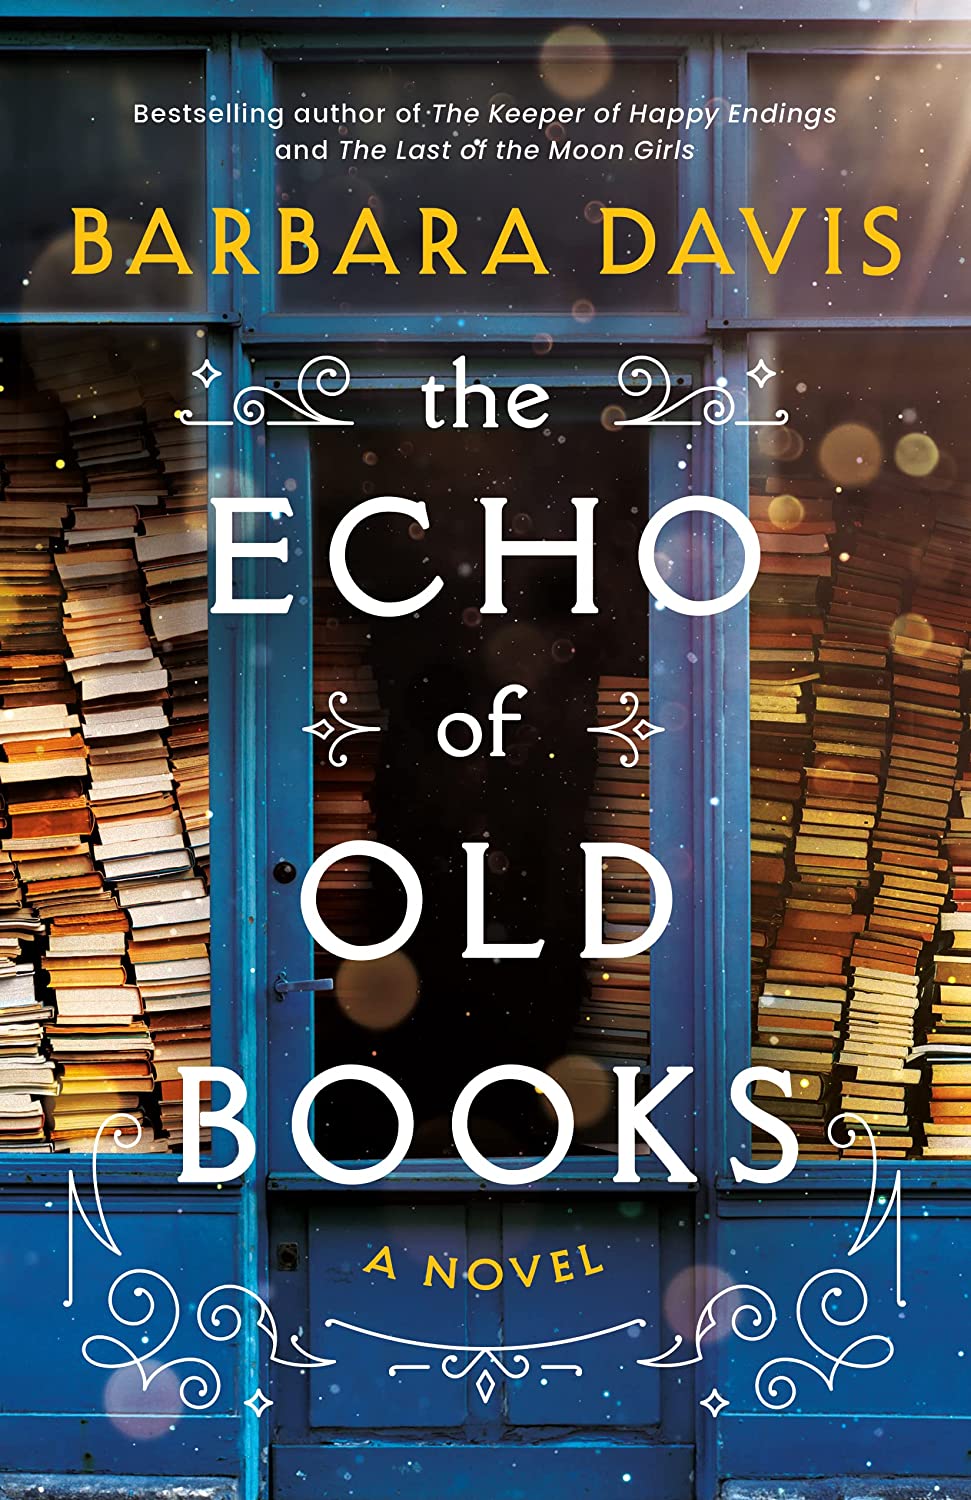 The Echo of Old Books by Barbara Davis